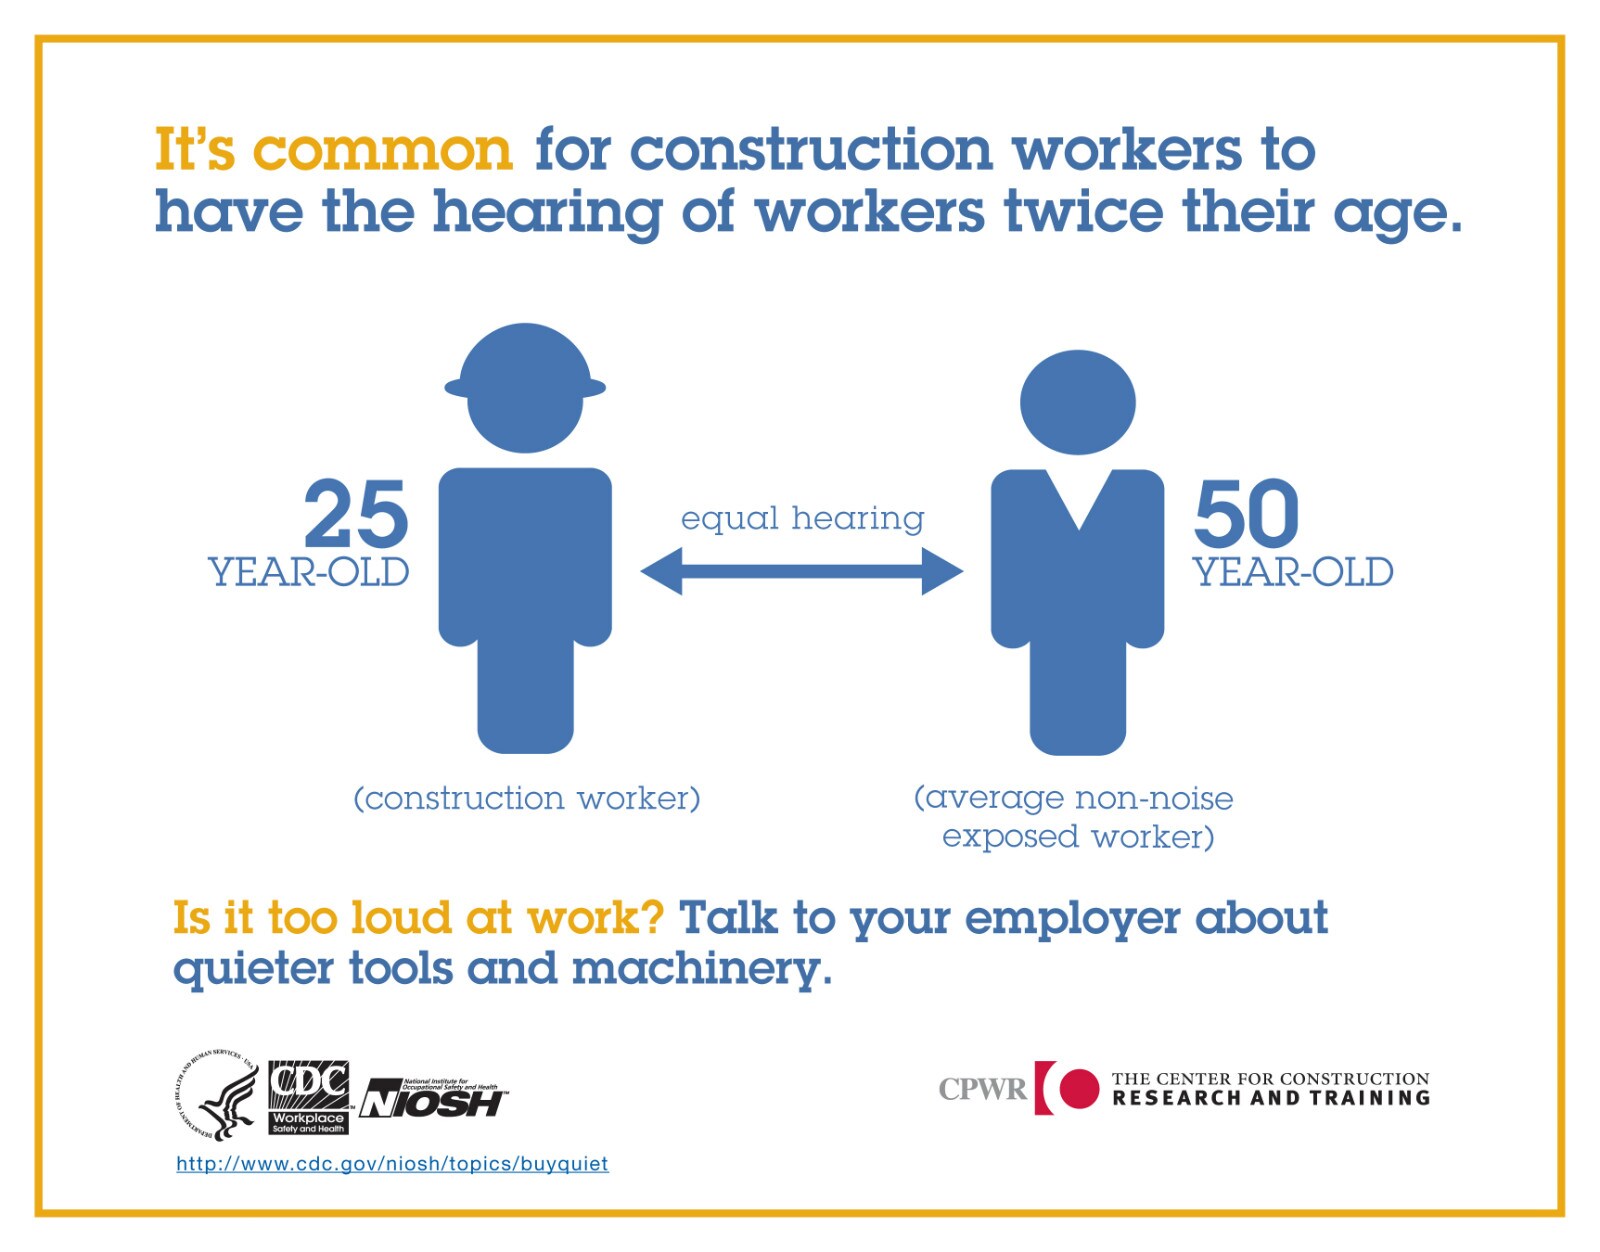 It's common for construction workers to have the hearing of workers twice their age.